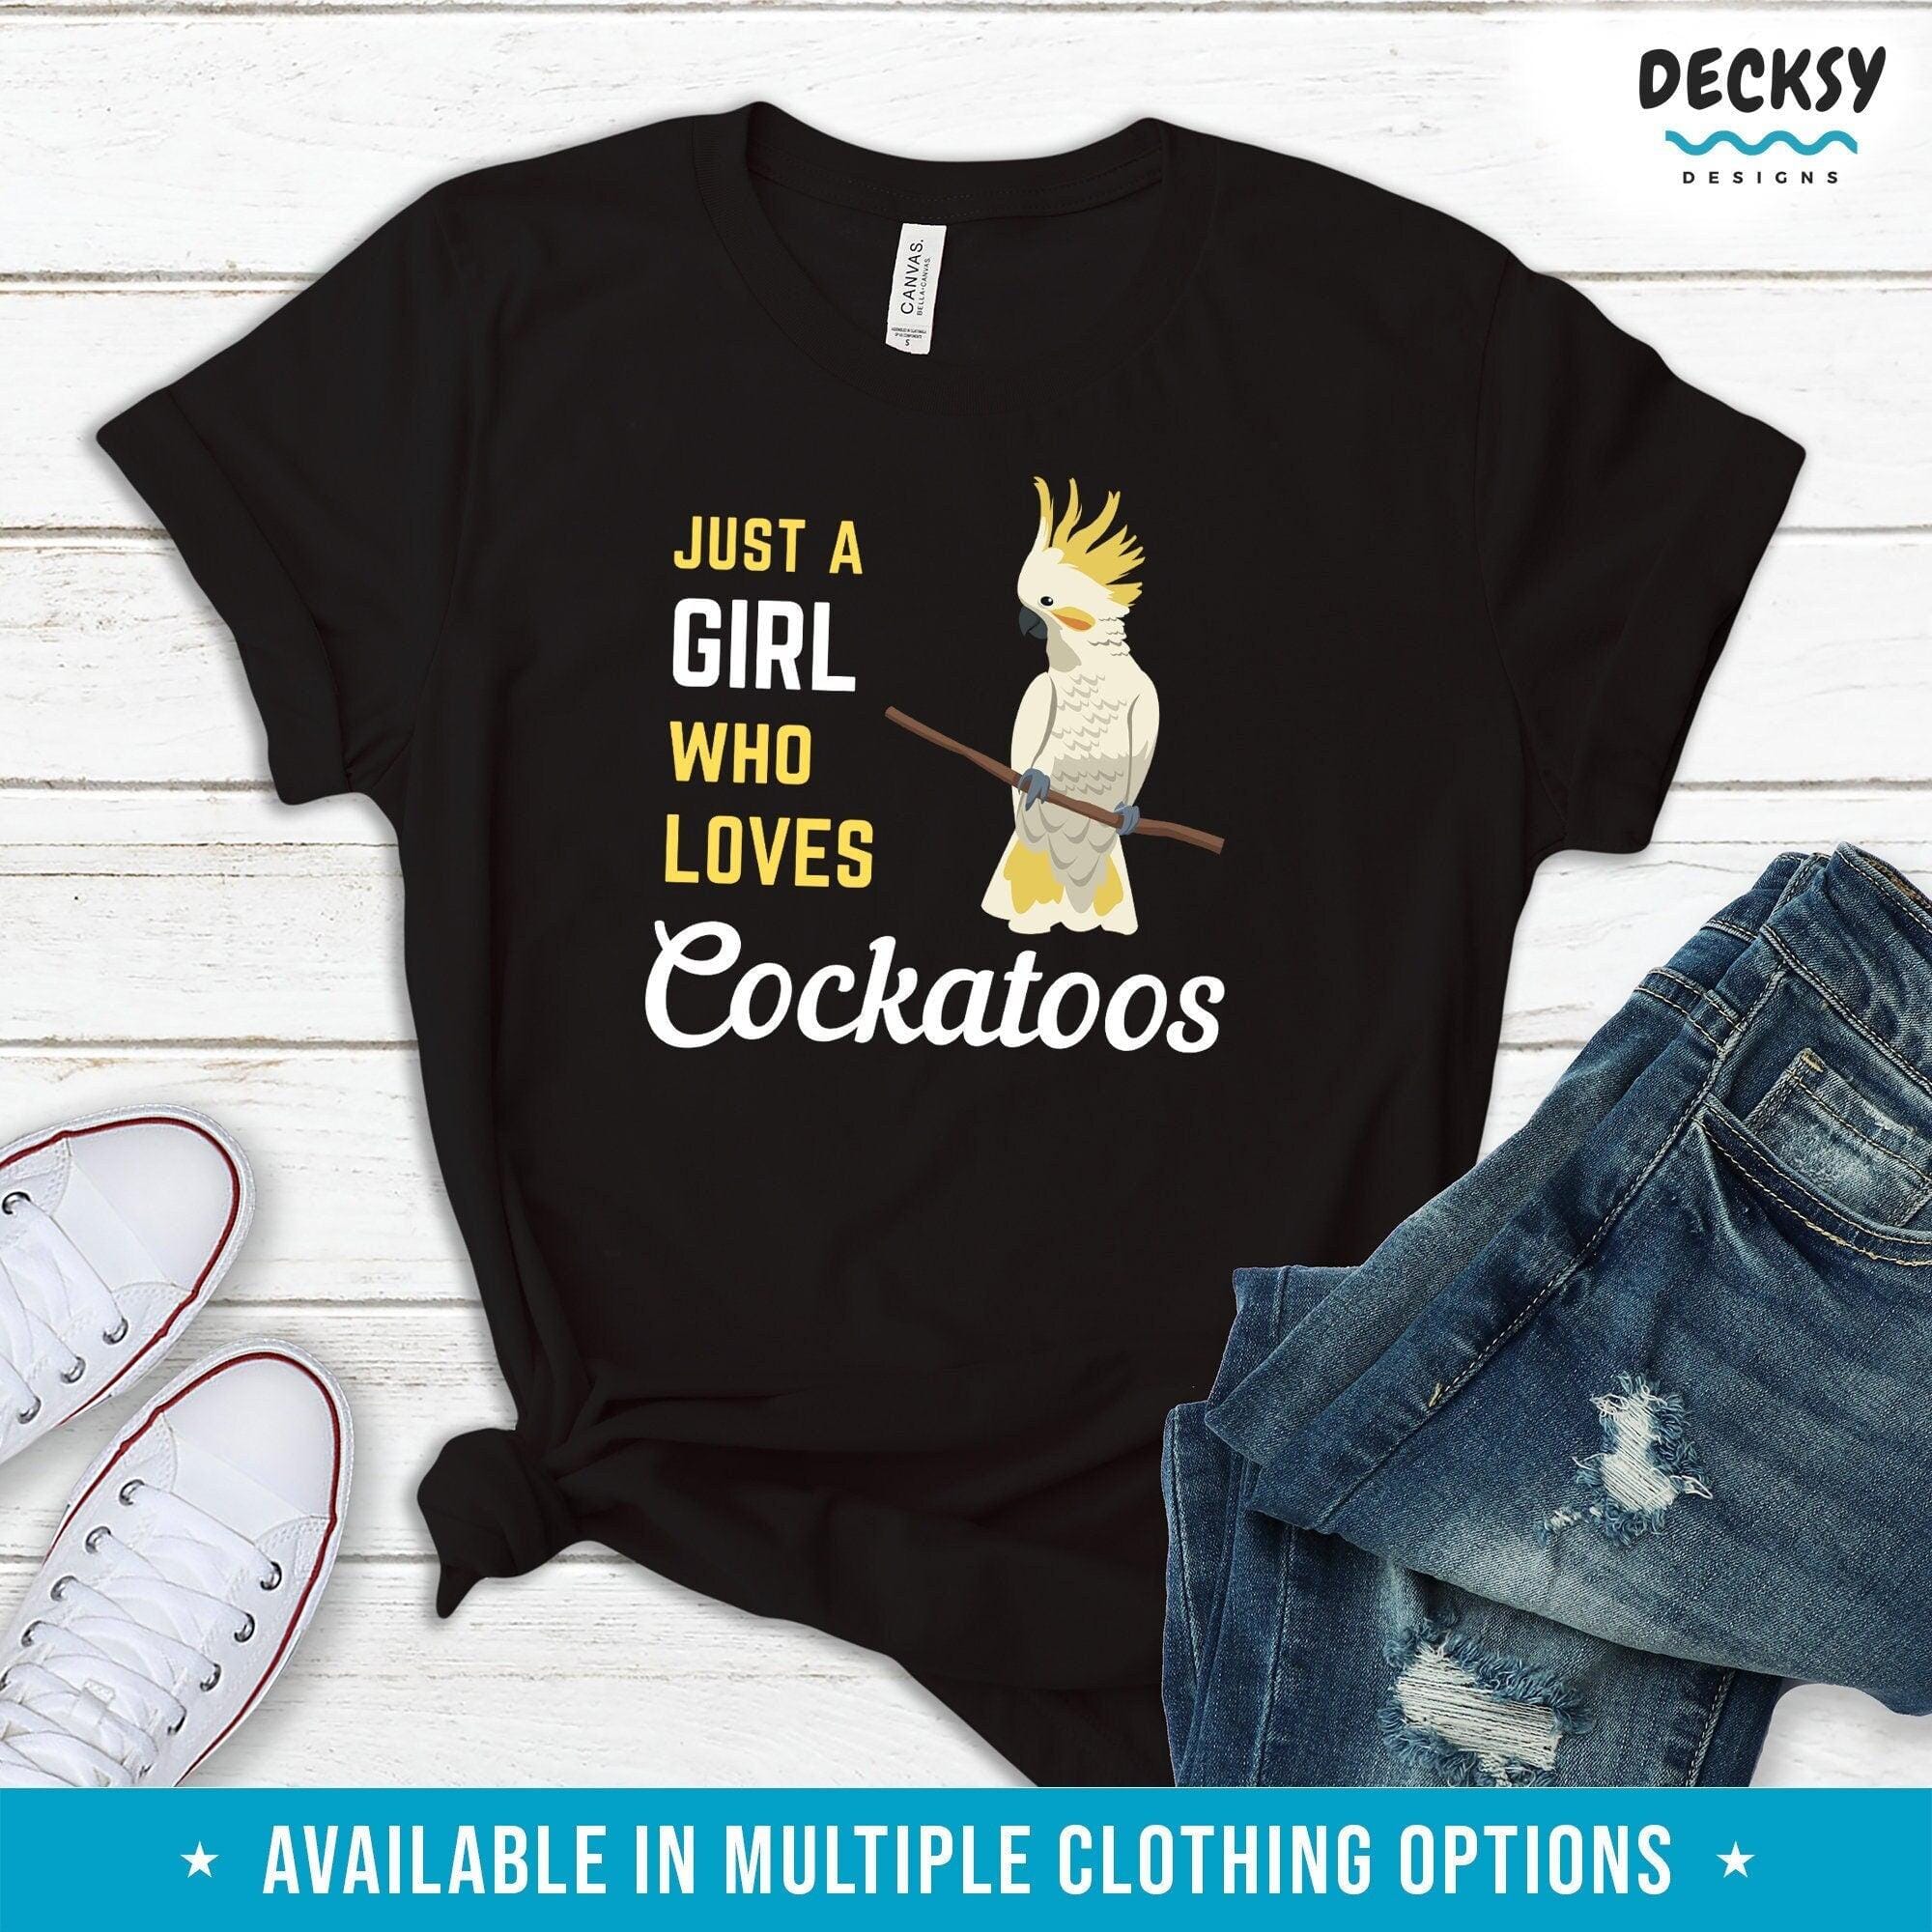 Cockatoo Shirt, Gift For Bird Lovers, Parrot Lover Gifts, Cockatoo Owner Sweatshirt Hoodie-Clothing:Gender-Neutral Adult Clothing:Tops & Tees:T-shirts:Graphic Tees-DecksyDesigns